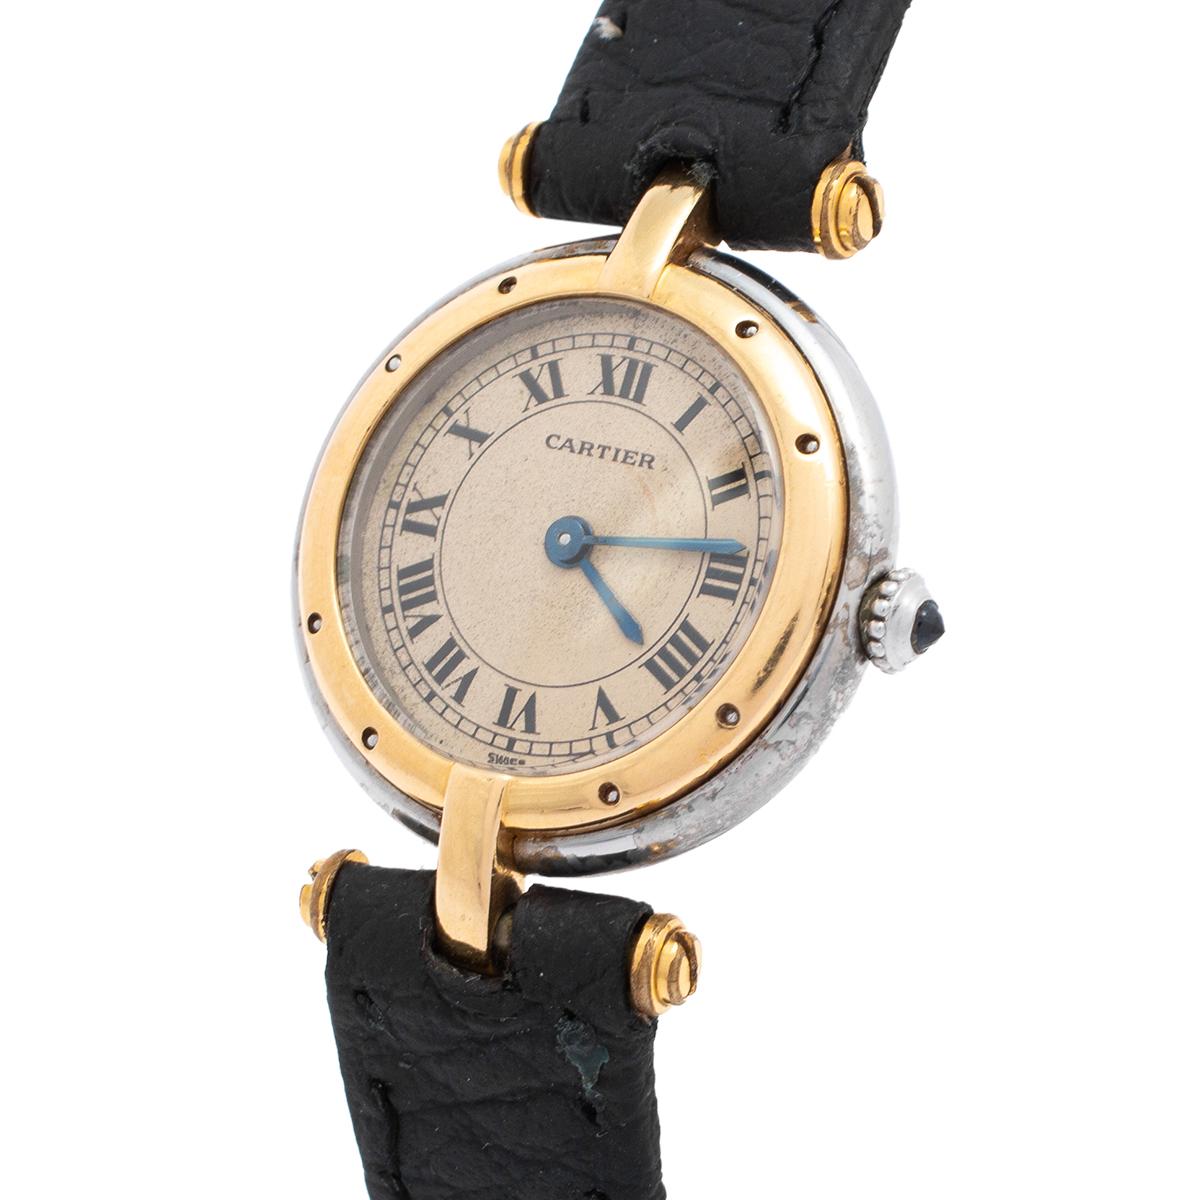 An icon from Cartier, this Cartier Panthère Vendome watch for women is an investment-worthy creation. It has a grand fusion of elegance and timeless charm in every detail, from the round case to the buckle clasp. Crafted in 18K yellow gold, the